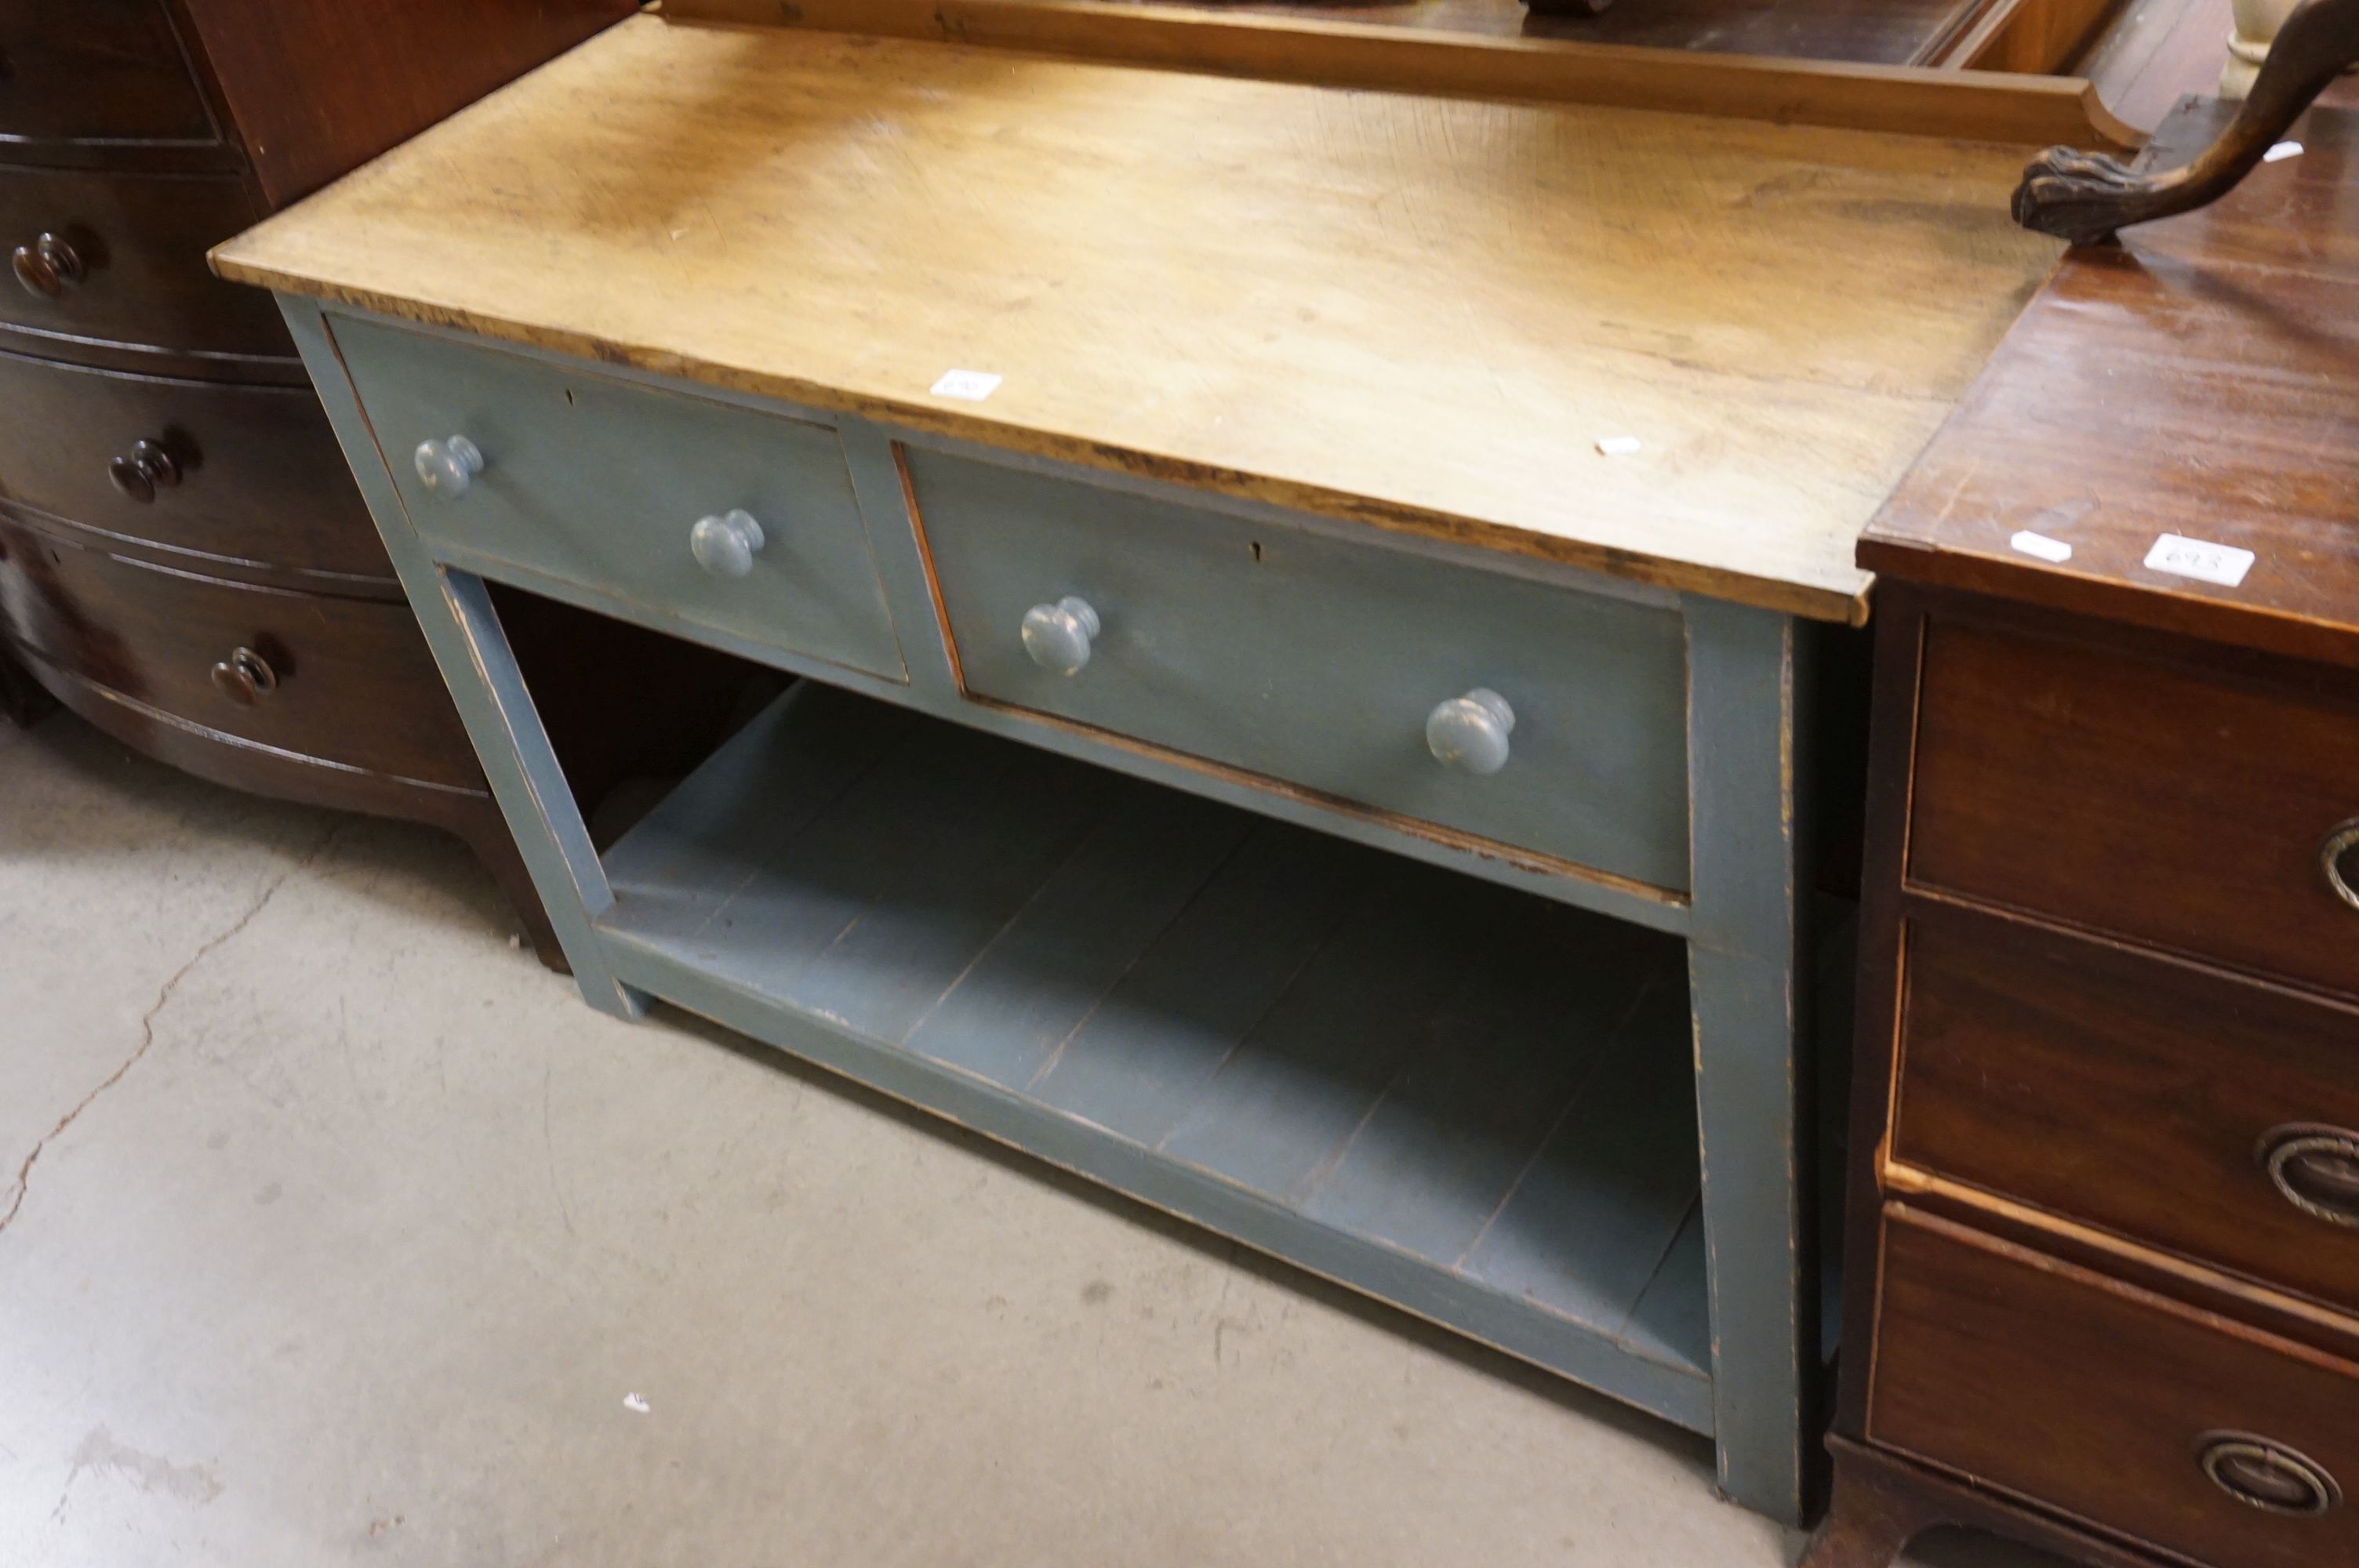 Ex Bakery Two Drawer Kitchen Work Table with undershelf